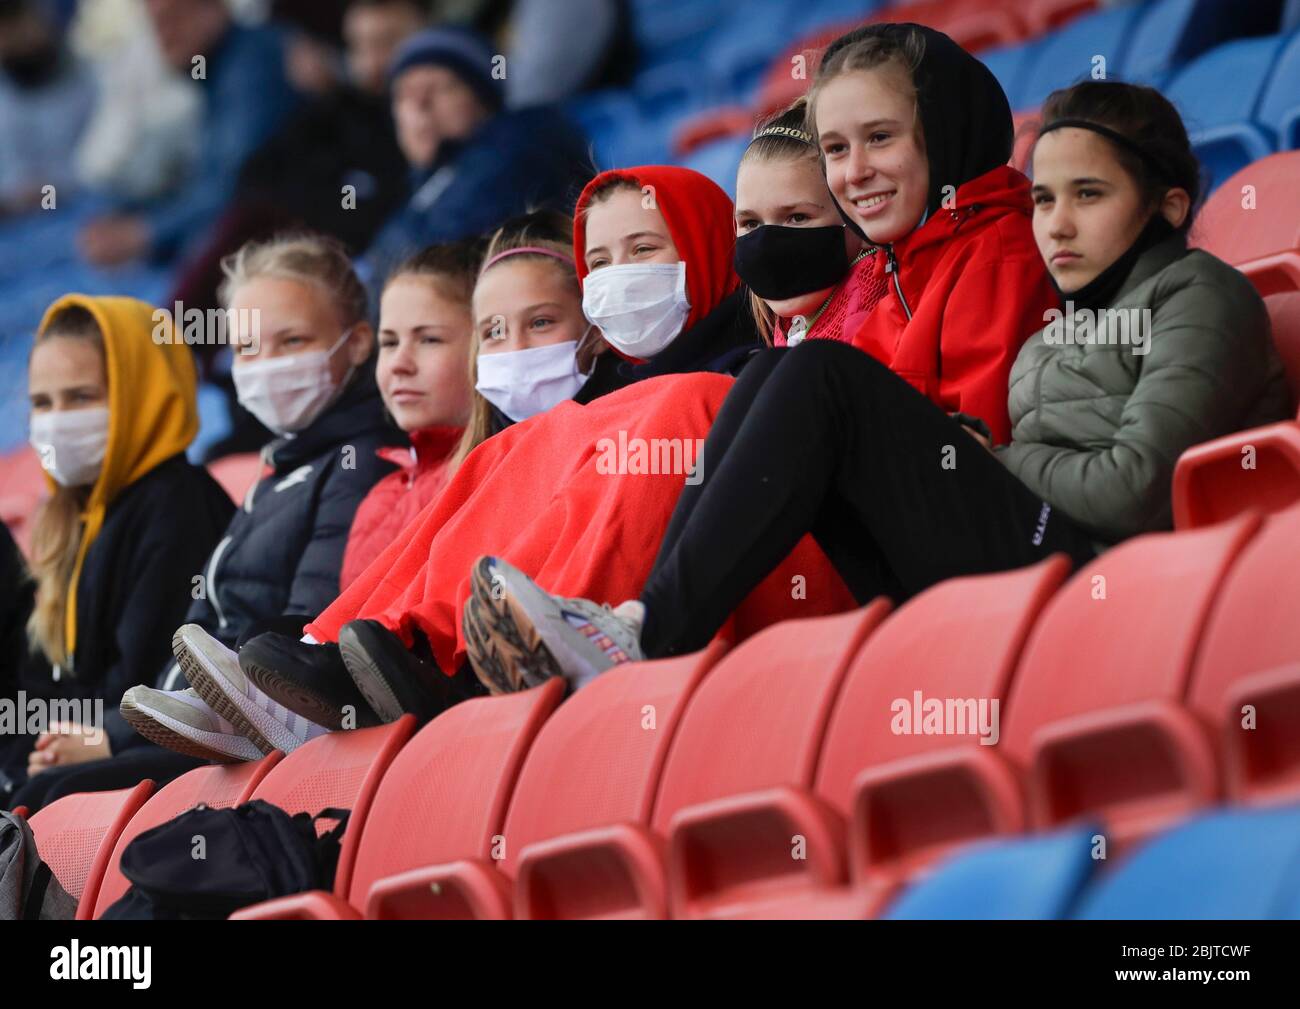 Fans wearing face masks to protect from coronavirus watch the Women's Major League soccer match between ABFF Women's Under-19 team and Dynamo-BGUFK in Minsk, Belarus, Thursday, April 30, 2020. Belarus is one of the few countries where professional soccer is still being played in front of spectators, and the only one in Europe. The World Health Organization is urging the government of Belarus to cancel public events and implement measures to ensure physical and social distancing amid the growing coronavirus outbreak. (AP Photo/Sergei Grits) Stock Photo